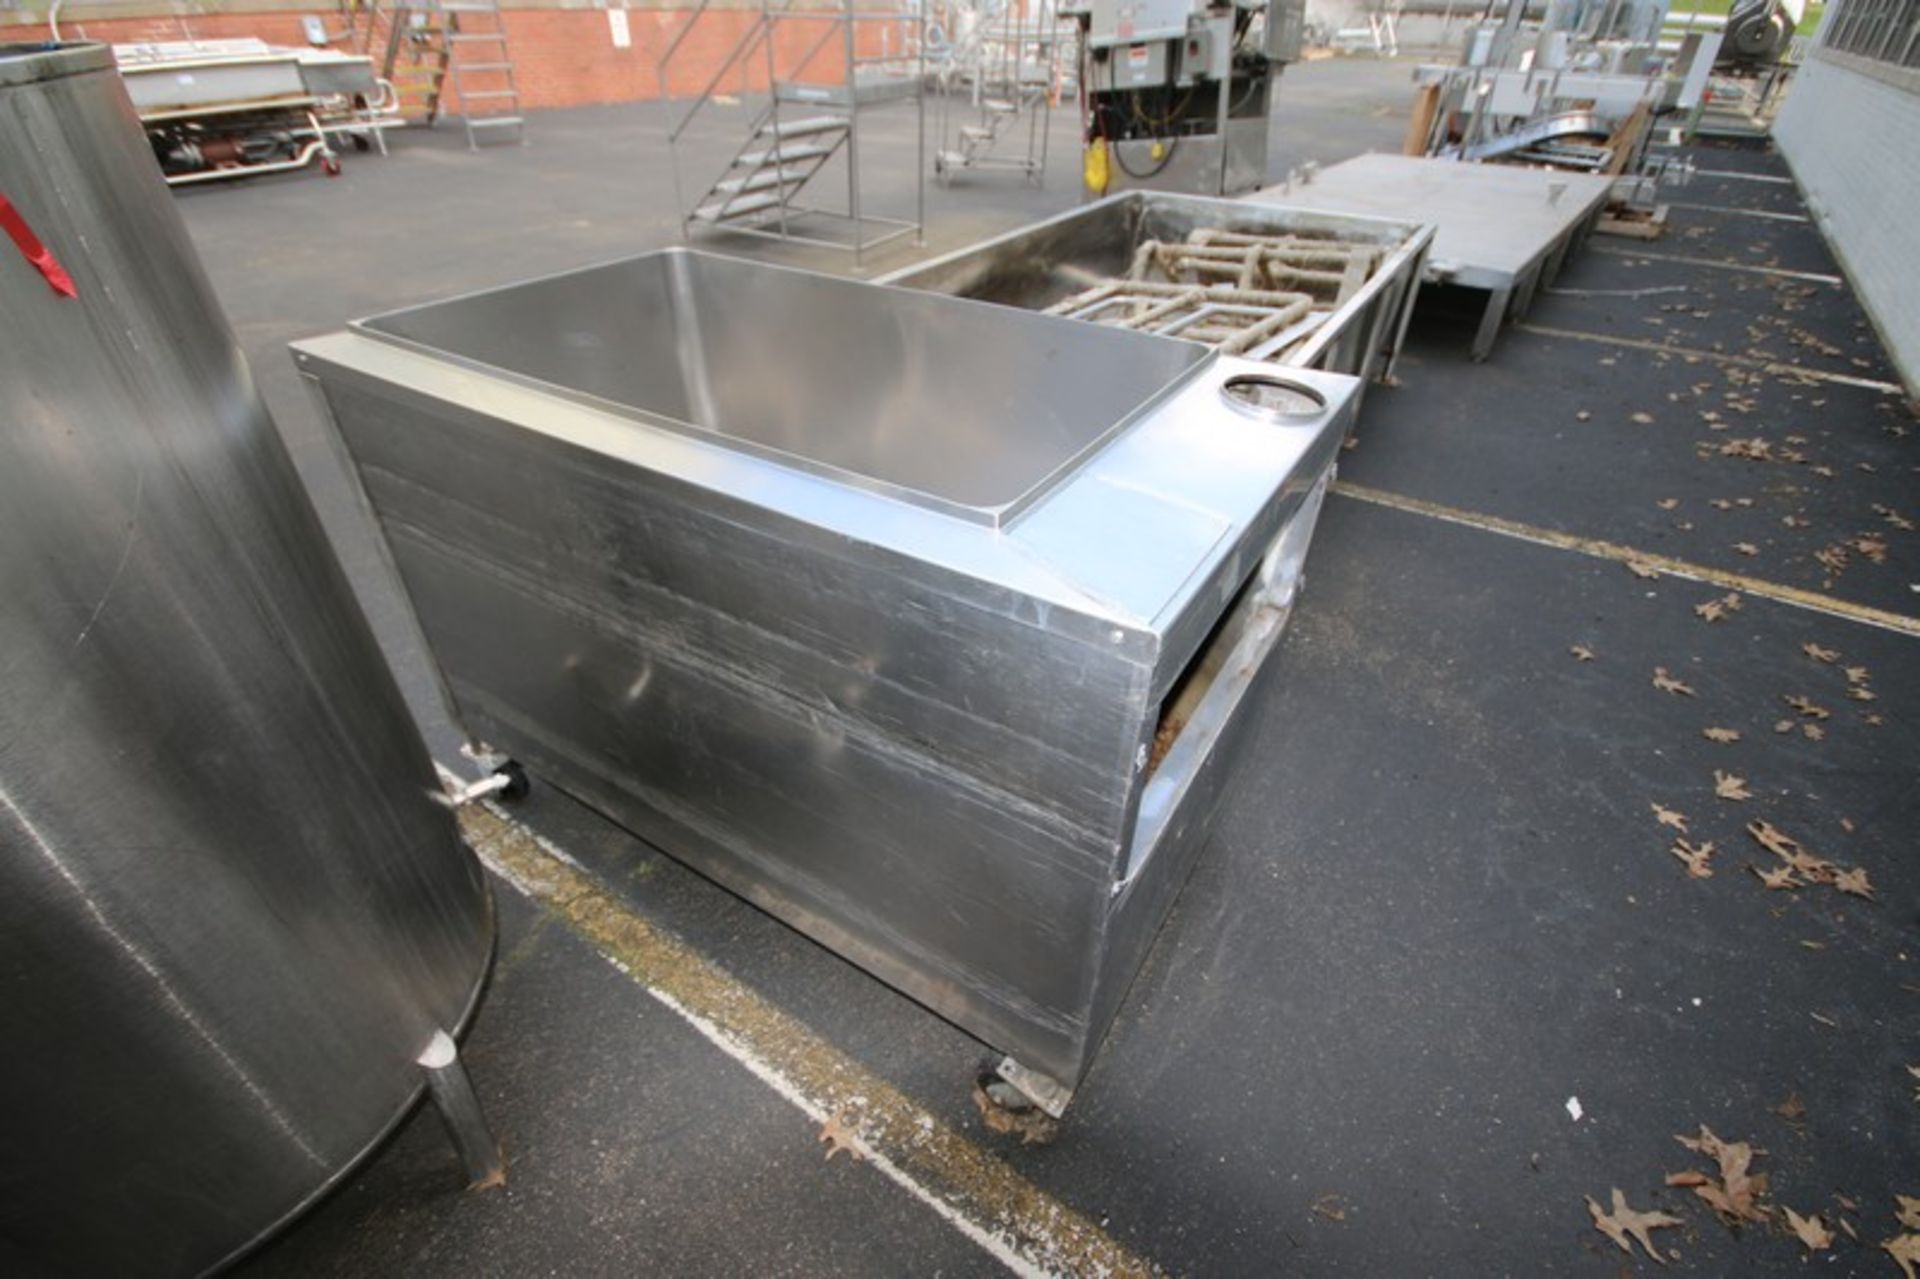 Square S/S Tank, Internal Dims. Aprox. 3 ft. 9” L x 24” W x 25” Deep, Mounted on Portable Wheels ( - Image 3 of 4